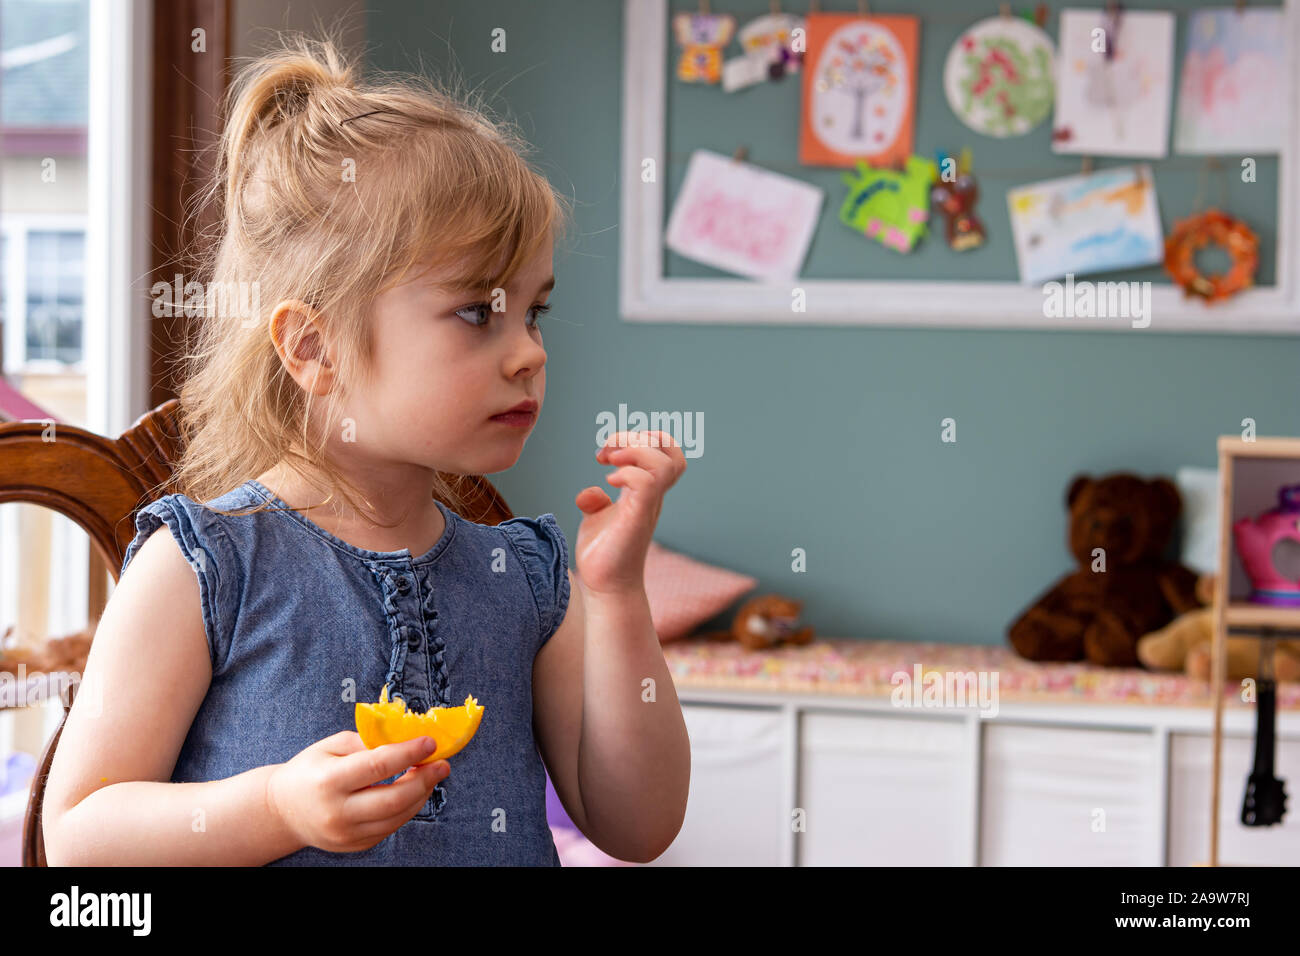 A pretty, young girl sitting at the kitchen table snacking on an orange. Stock Photo